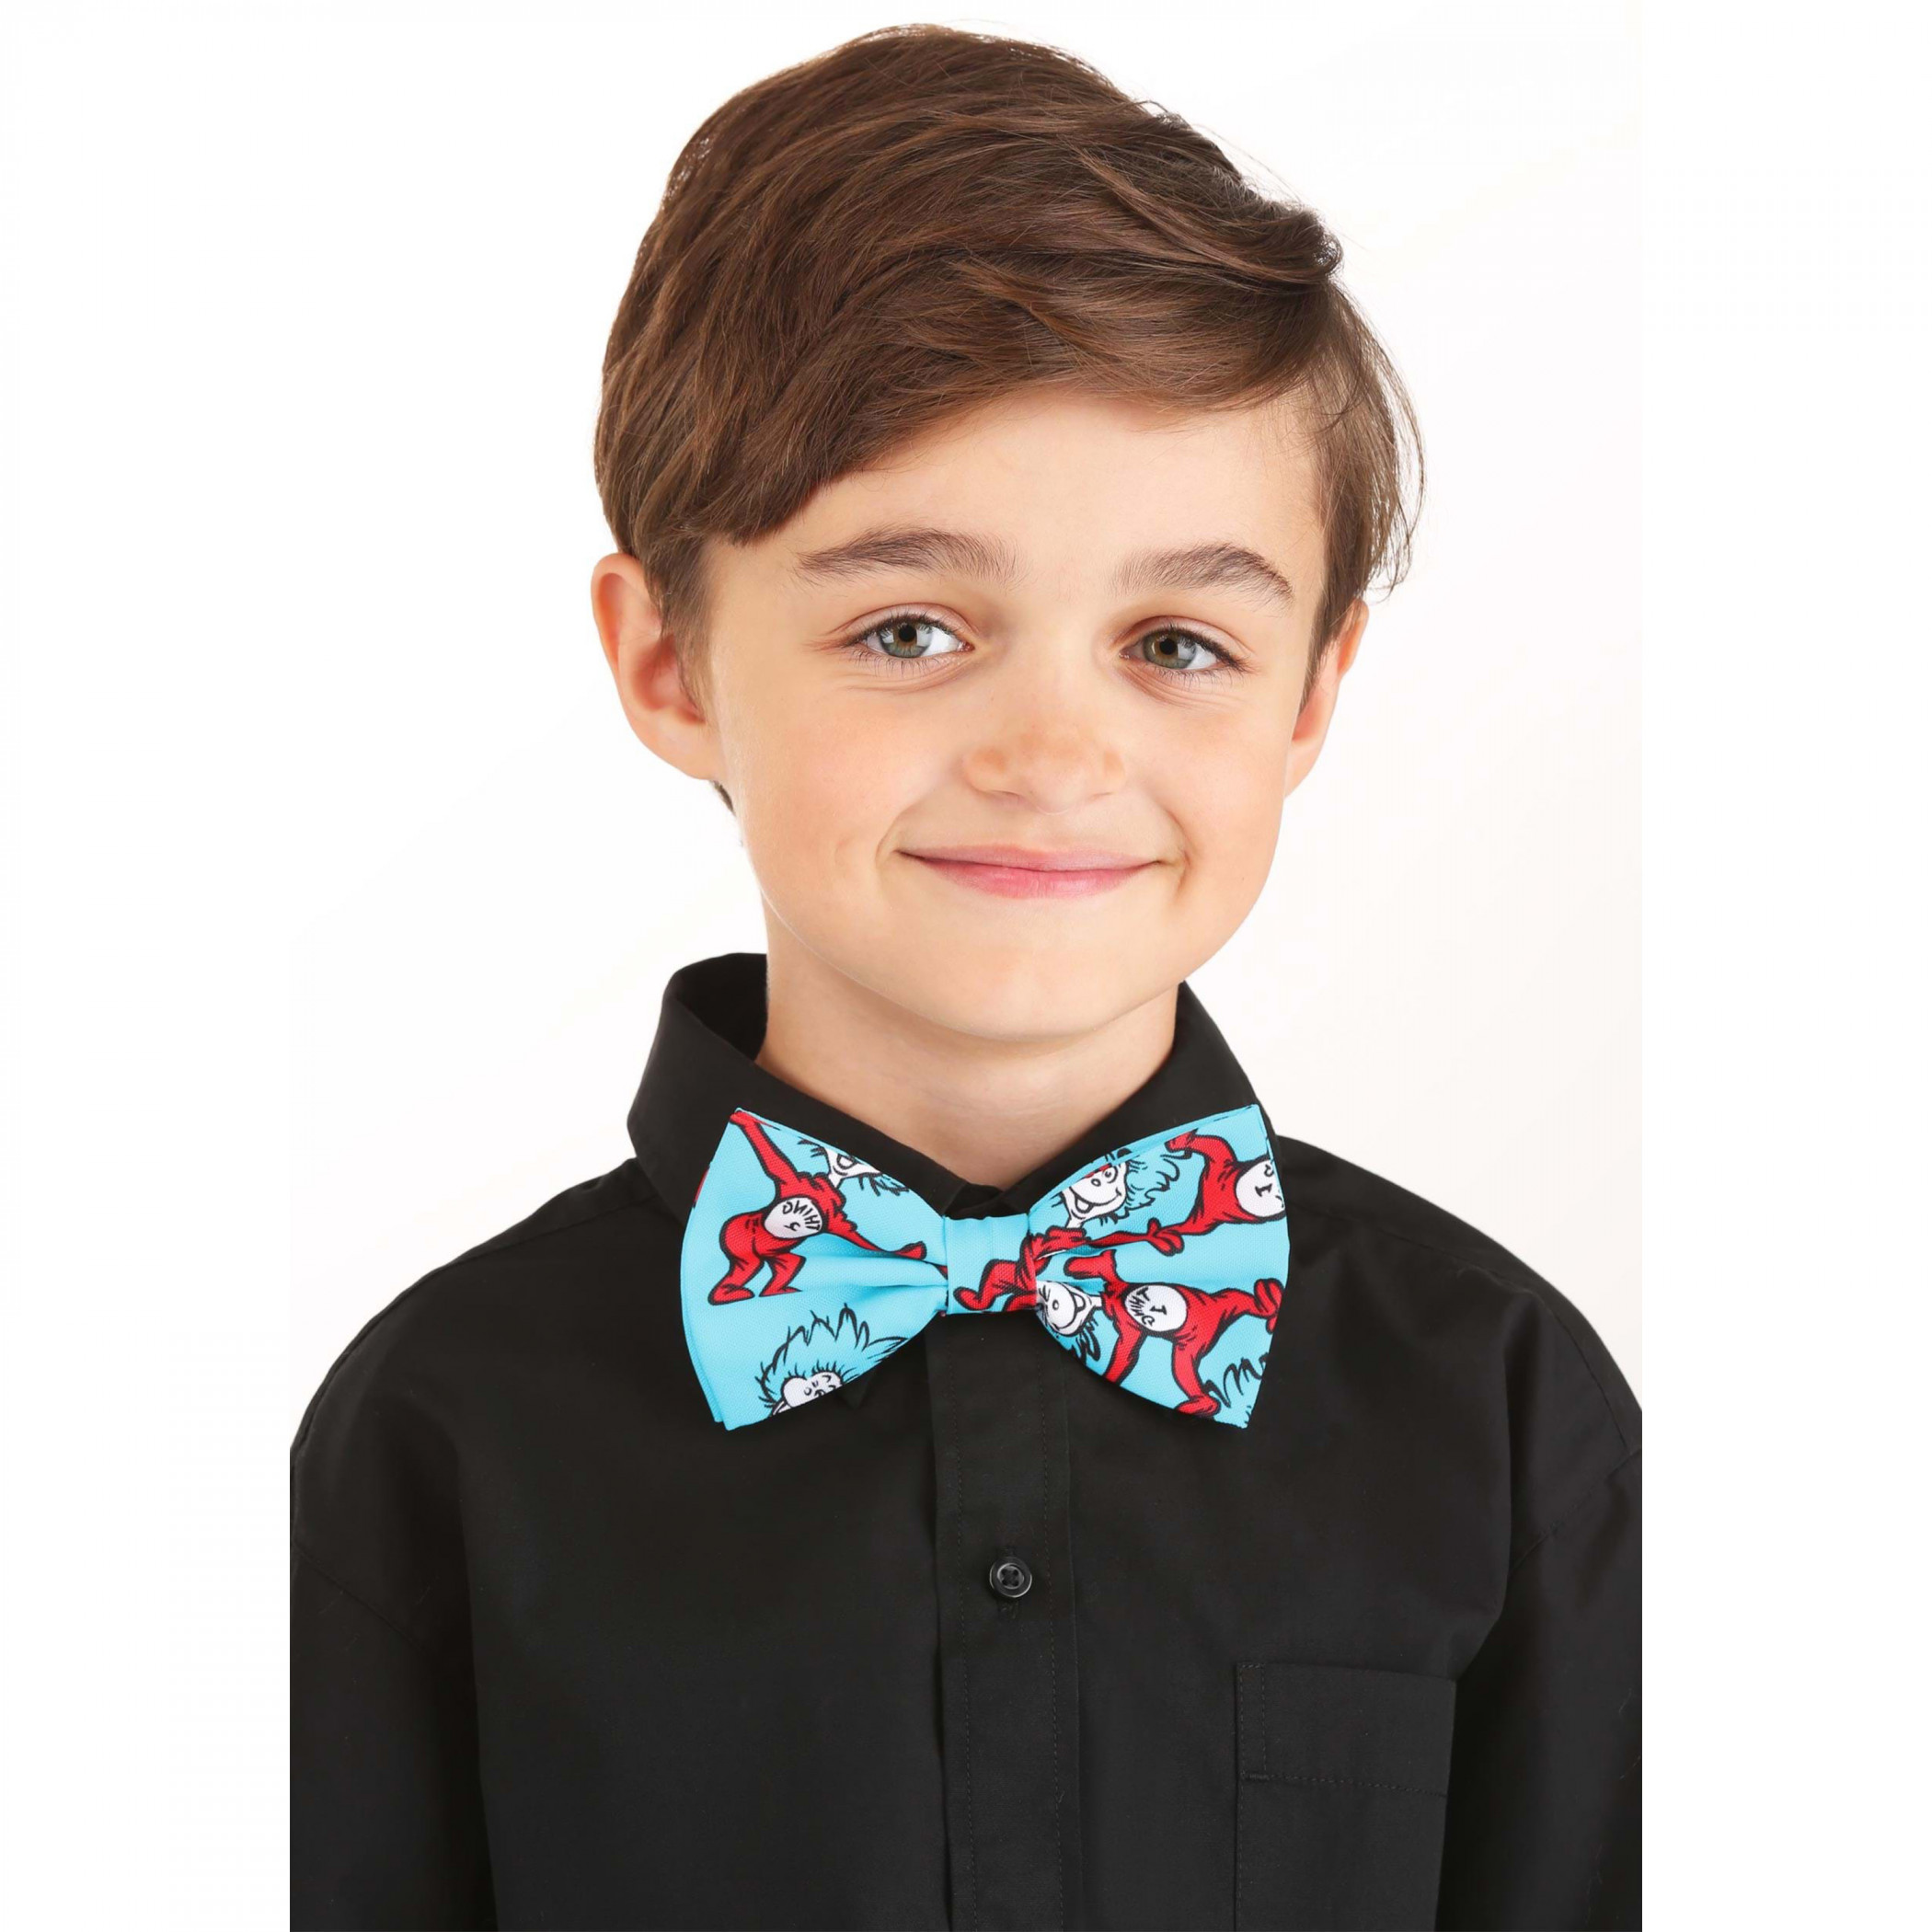 Dr. Seuss Characters Three Piece Bow Tie Set